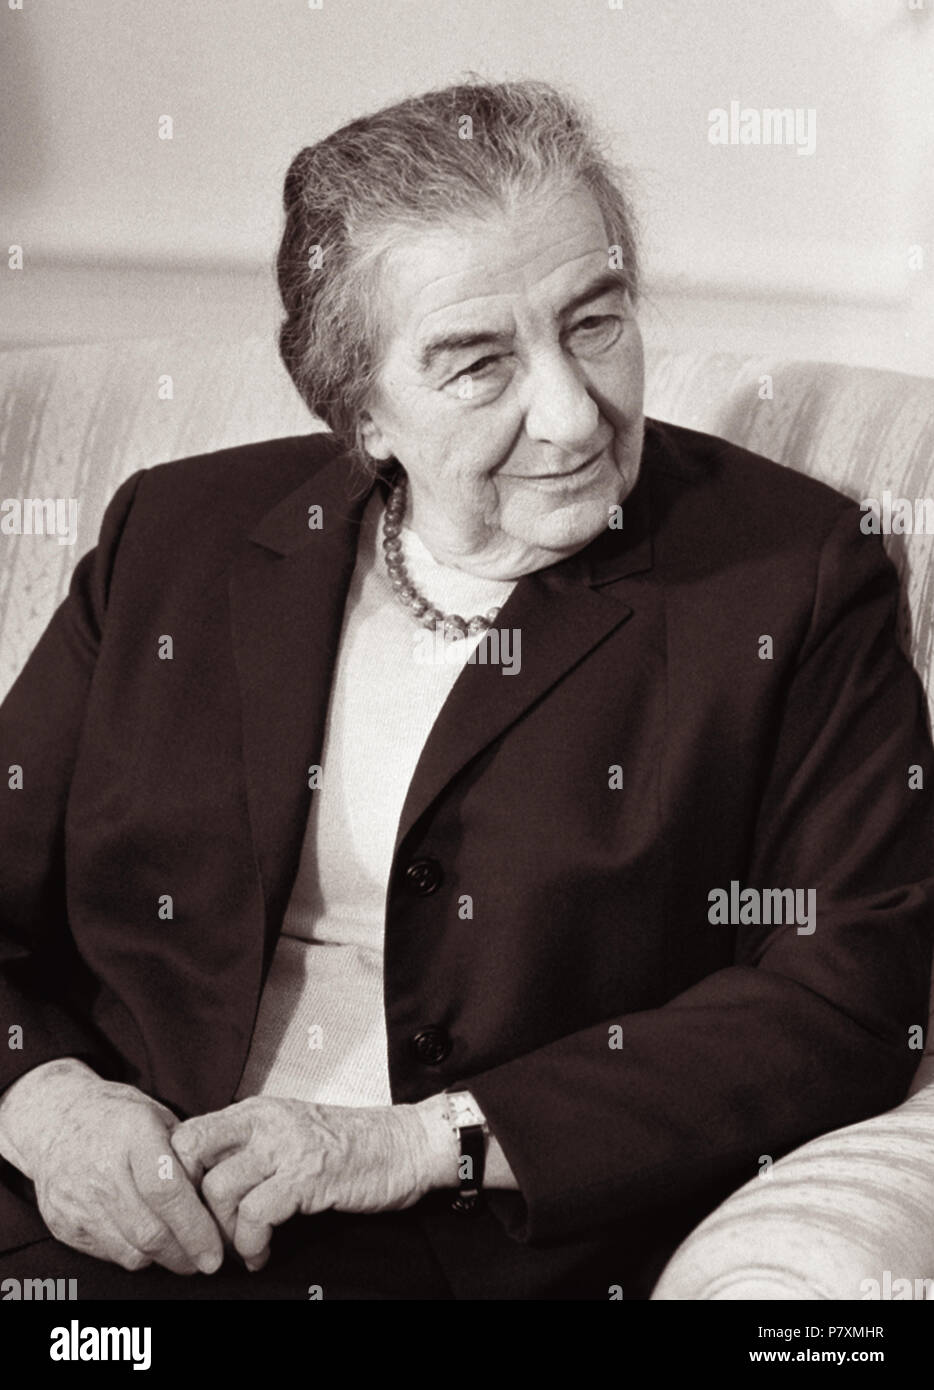 Israeli Prime Minister Golda Meir meeting in the Oval Office of the White House with President Richard M. Nixon on March 1, 1973. Stock Photo